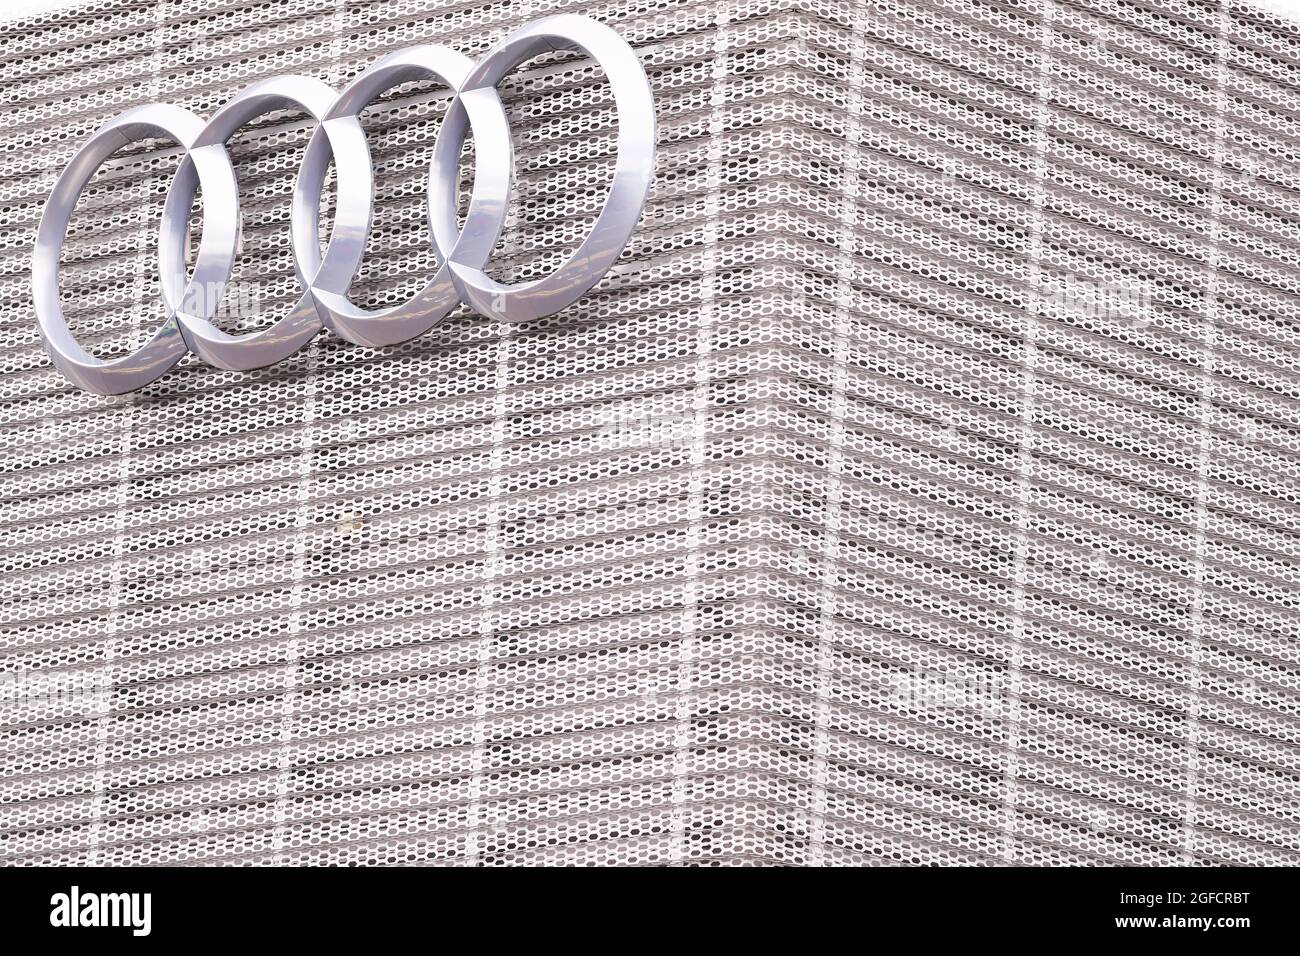 The Audi logo and signage at the main Audi car dealership in Belfast, Northern Ireland. Stock Photo